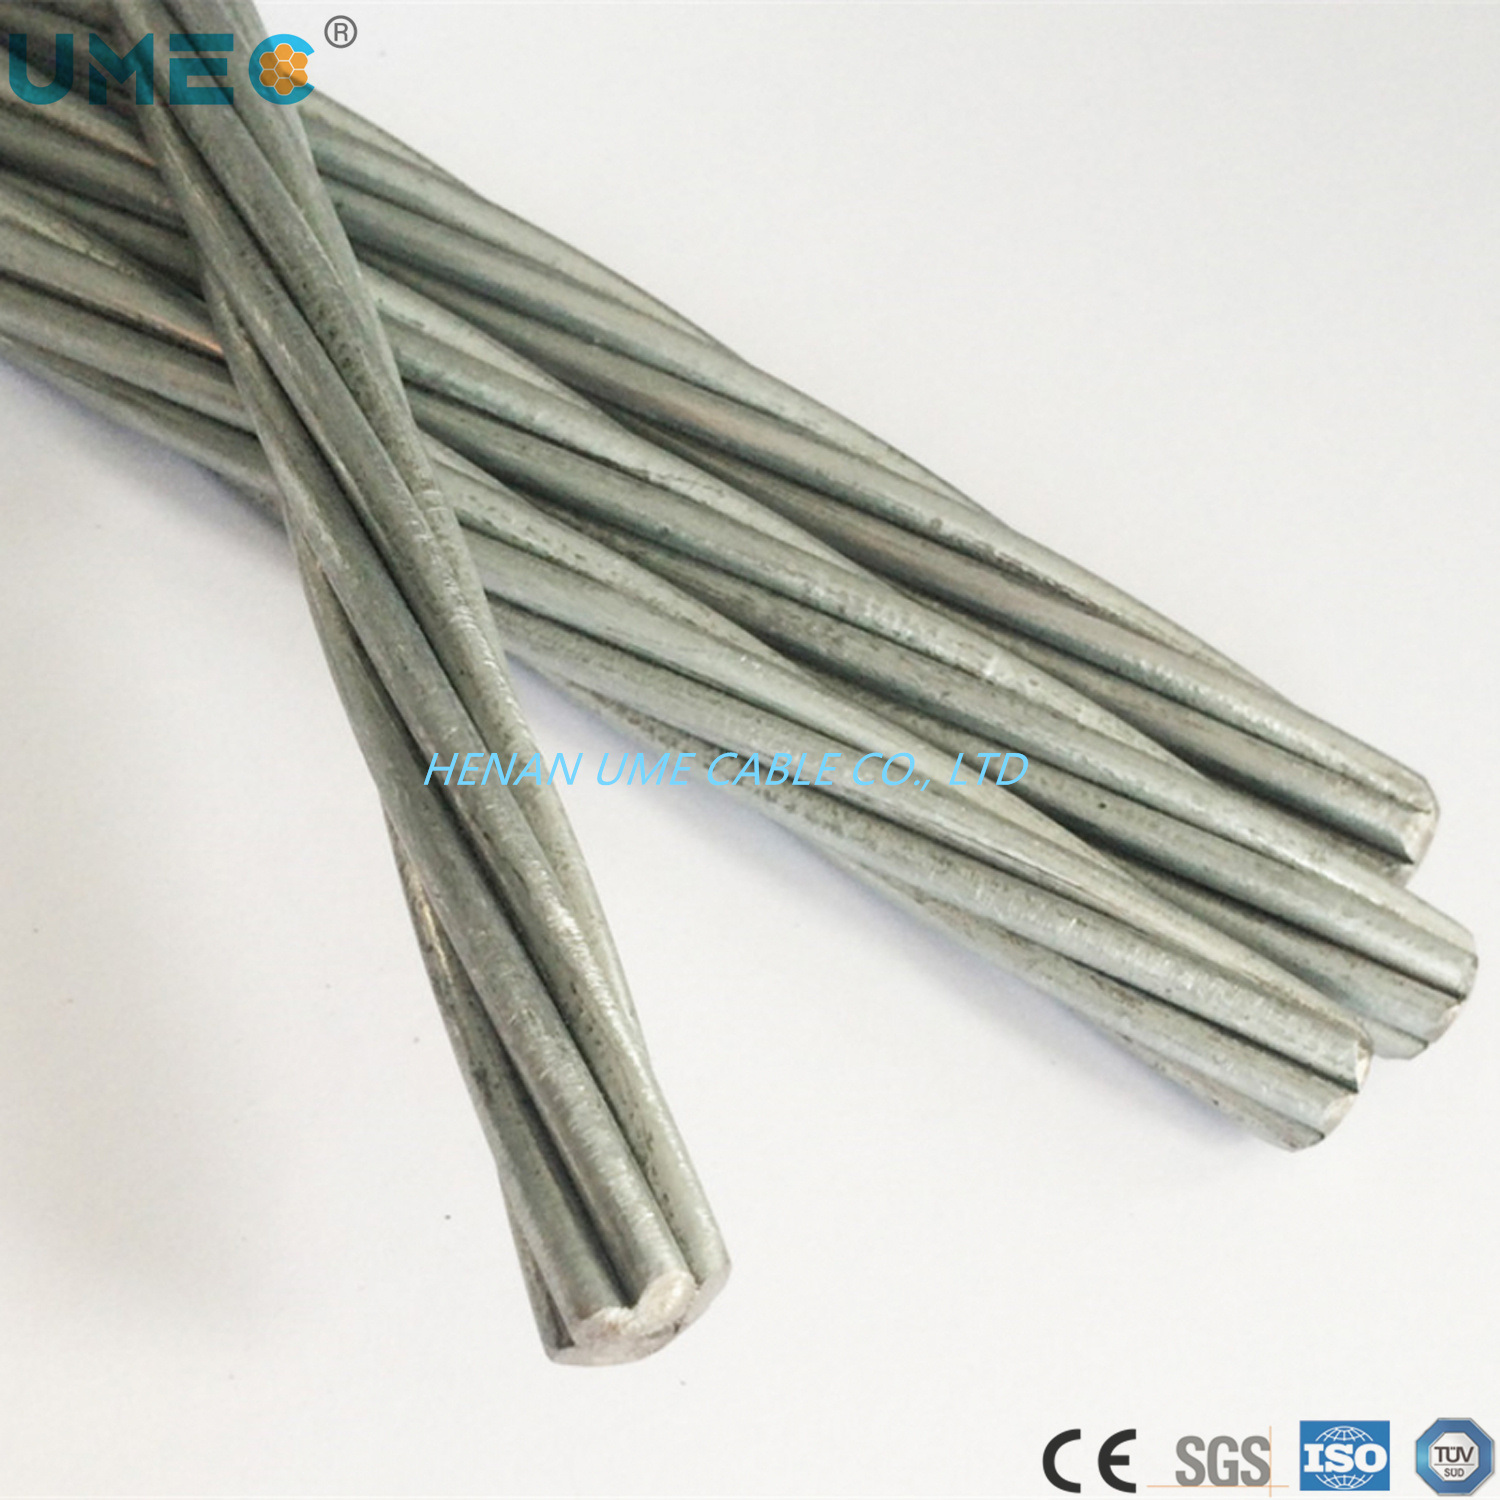 Zinc Coating Steel Core Electrical Power Transmission Lines Galvanized Steel Wire Strand